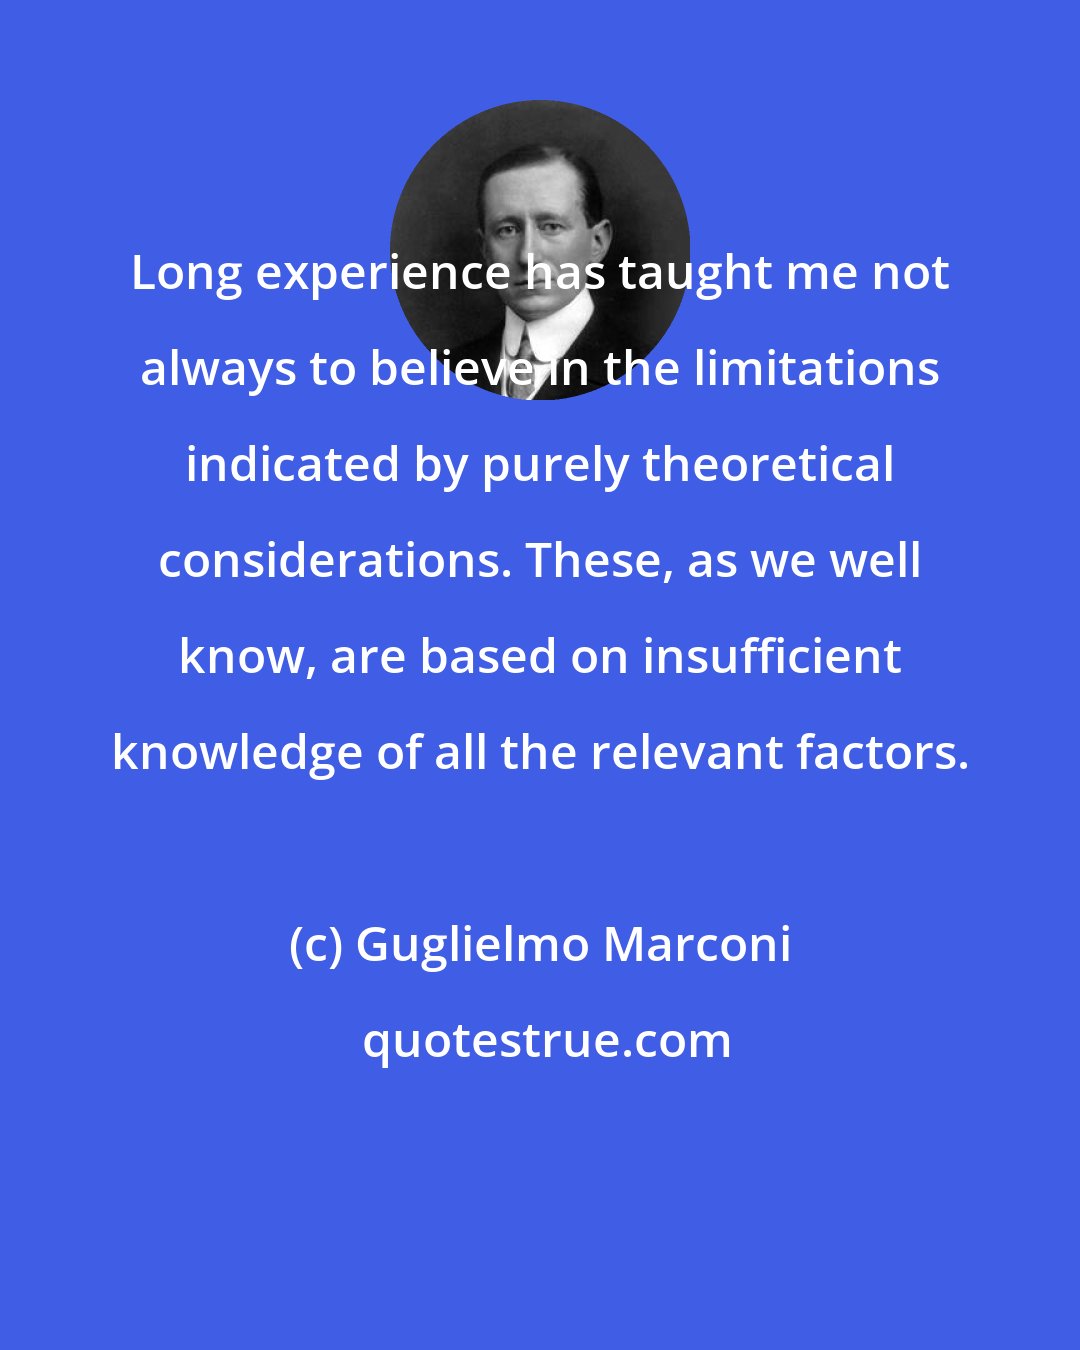 Guglielmo Marconi: Long experience has taught me not always to believe in the limitations indicated by purely theoretical considerations. These, as we well know, are based on insufficient knowledge of all the relevant factors.